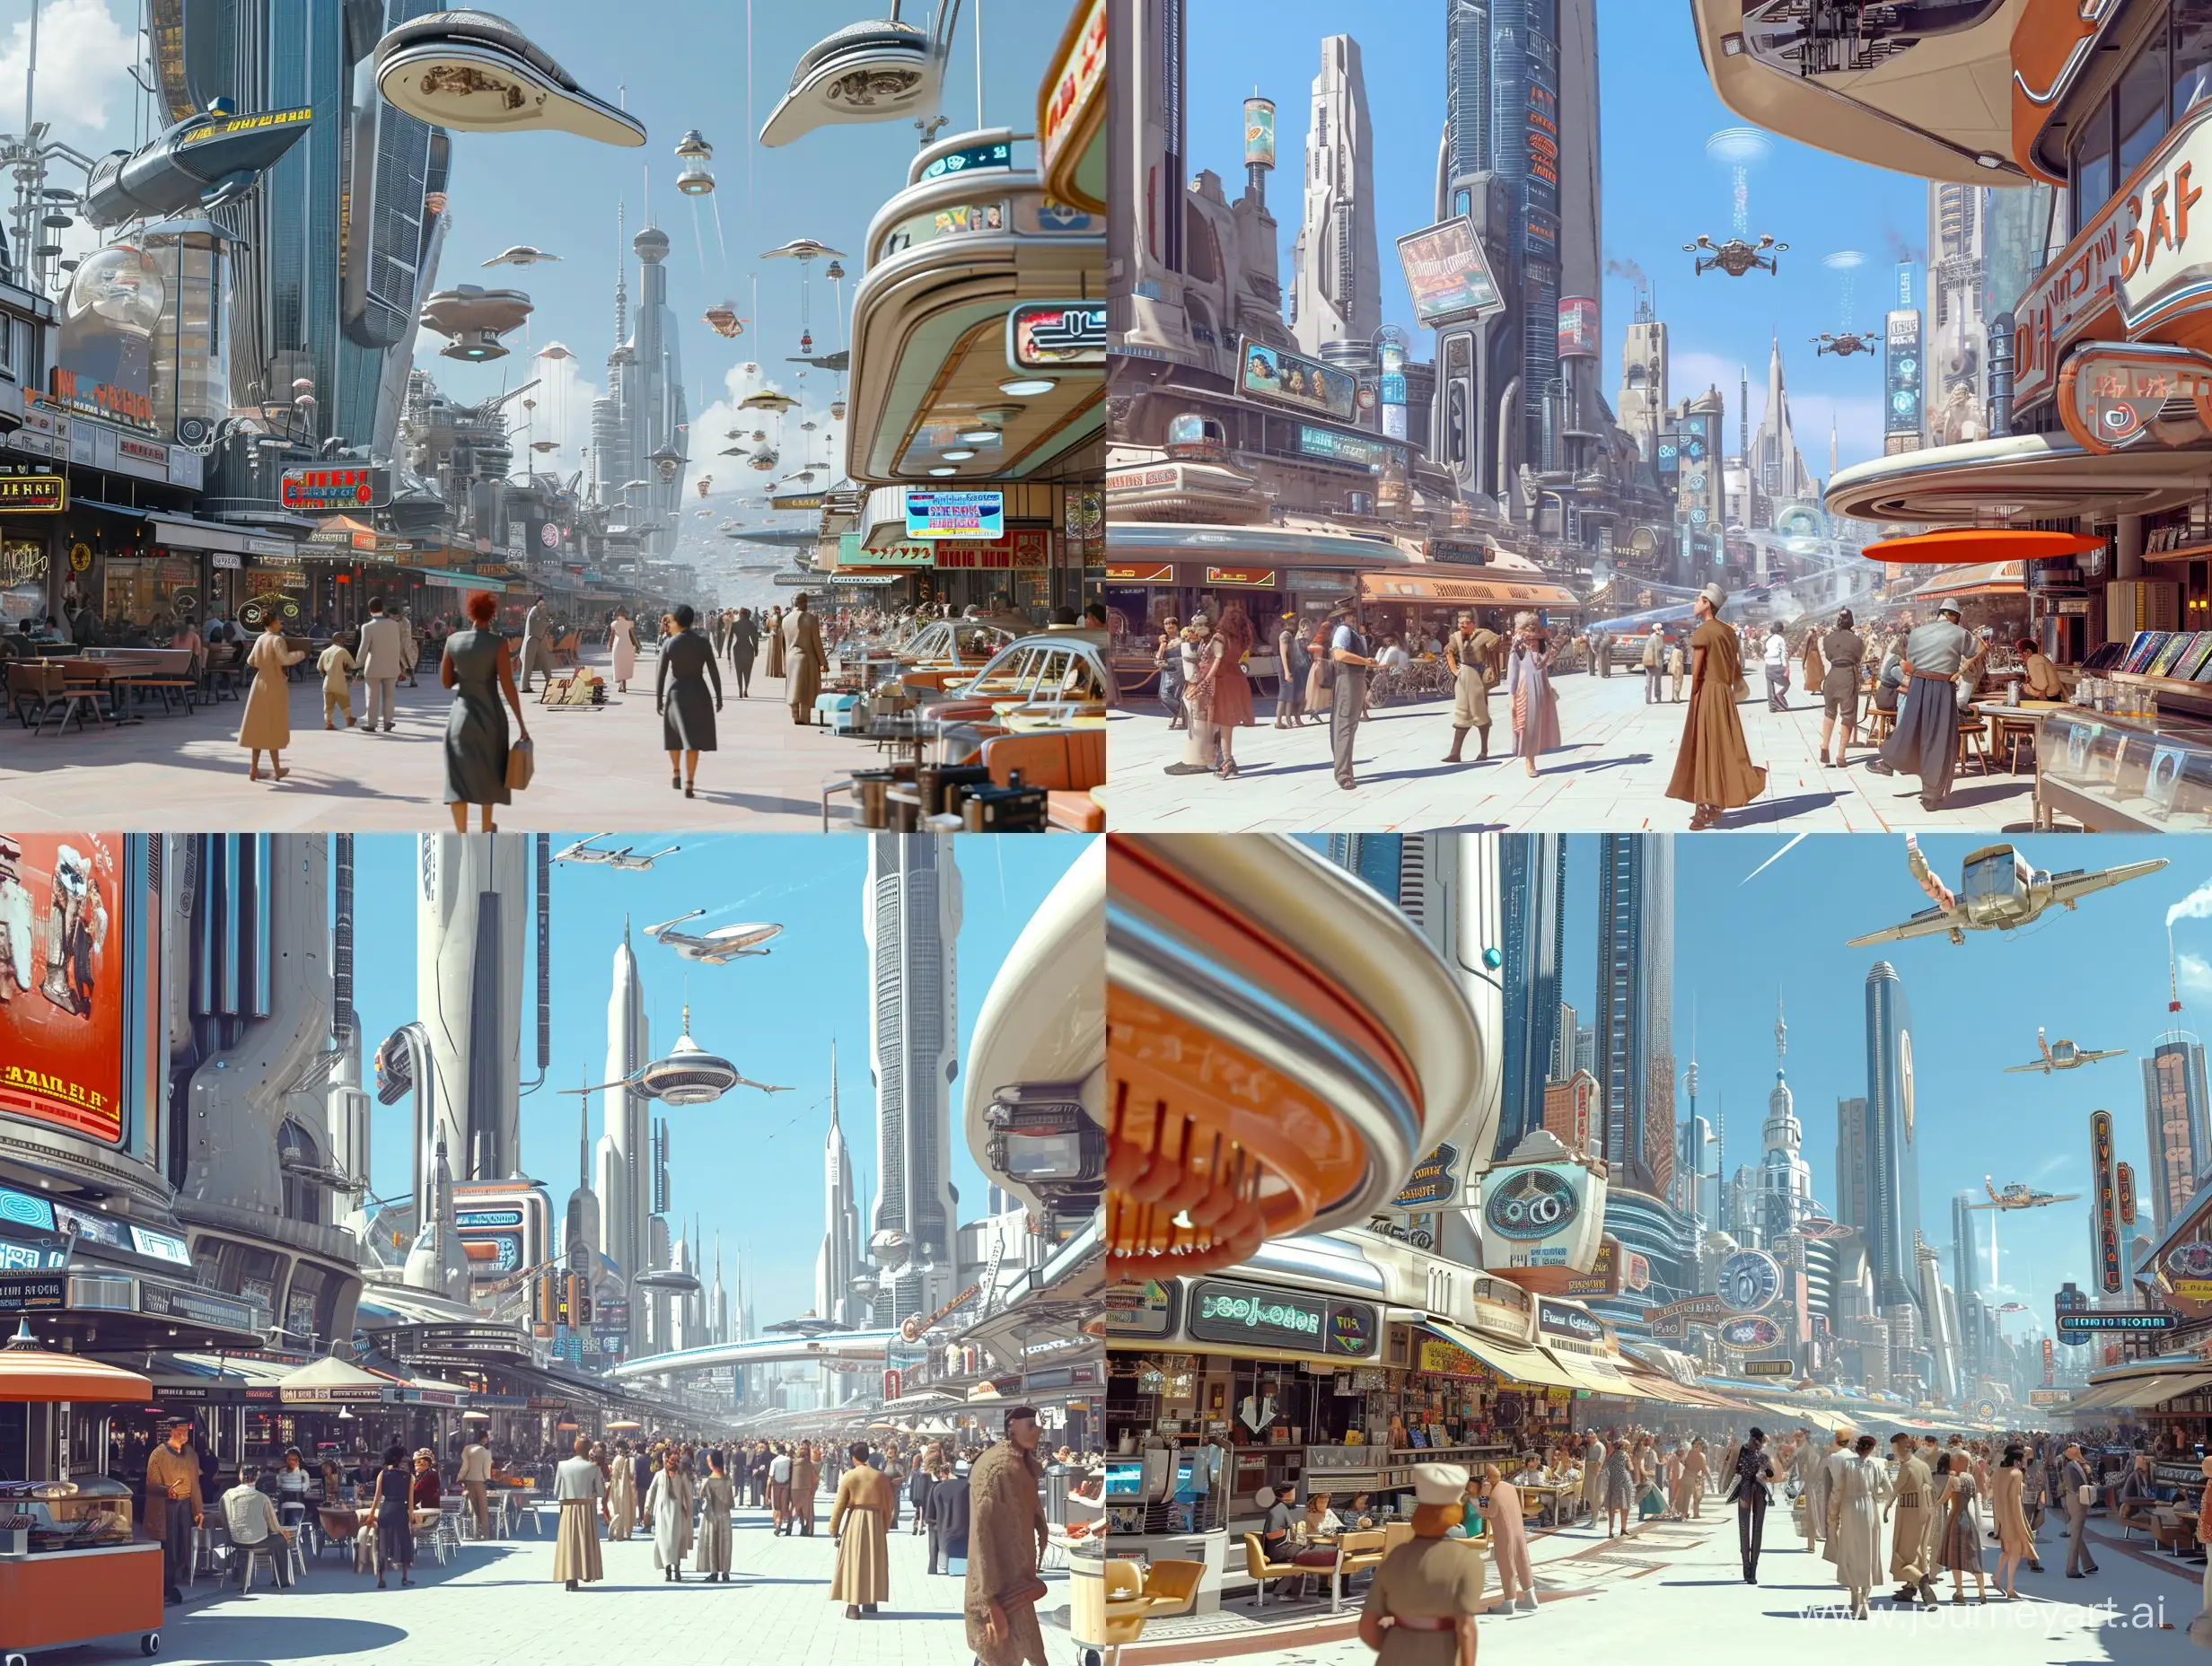 A bustling retro-futuristic cityscape during the day, with a relaxing atmosphere. The scene is a blend of retro sci-fi and naturalism, capturing the essence of a bygone era reimagined with futuristic elements. Skyscrapers with smooth curves and chrome finishes tower over quaint diners and arcades, featuring neon signs and holographic advertisements. People dressed in vintage-inspired future fashion stroll leisurely or ride on levitating public transport. The sky is a clear blue, dotted with sleek flying cars zipping by. Street vendors sell high-tech gadgets alongside vinyl records, creating a harmonious blend of past and future. The air is filled with a soft buzz of conversation, electronic beeps, and the whir of anti-gravity engines. The overall ambiance is vibrant and full of life, yet there's a sense of calmness in the air. Every detail is meticulously crafted to evoke a sense of wonder and nostalgia.

